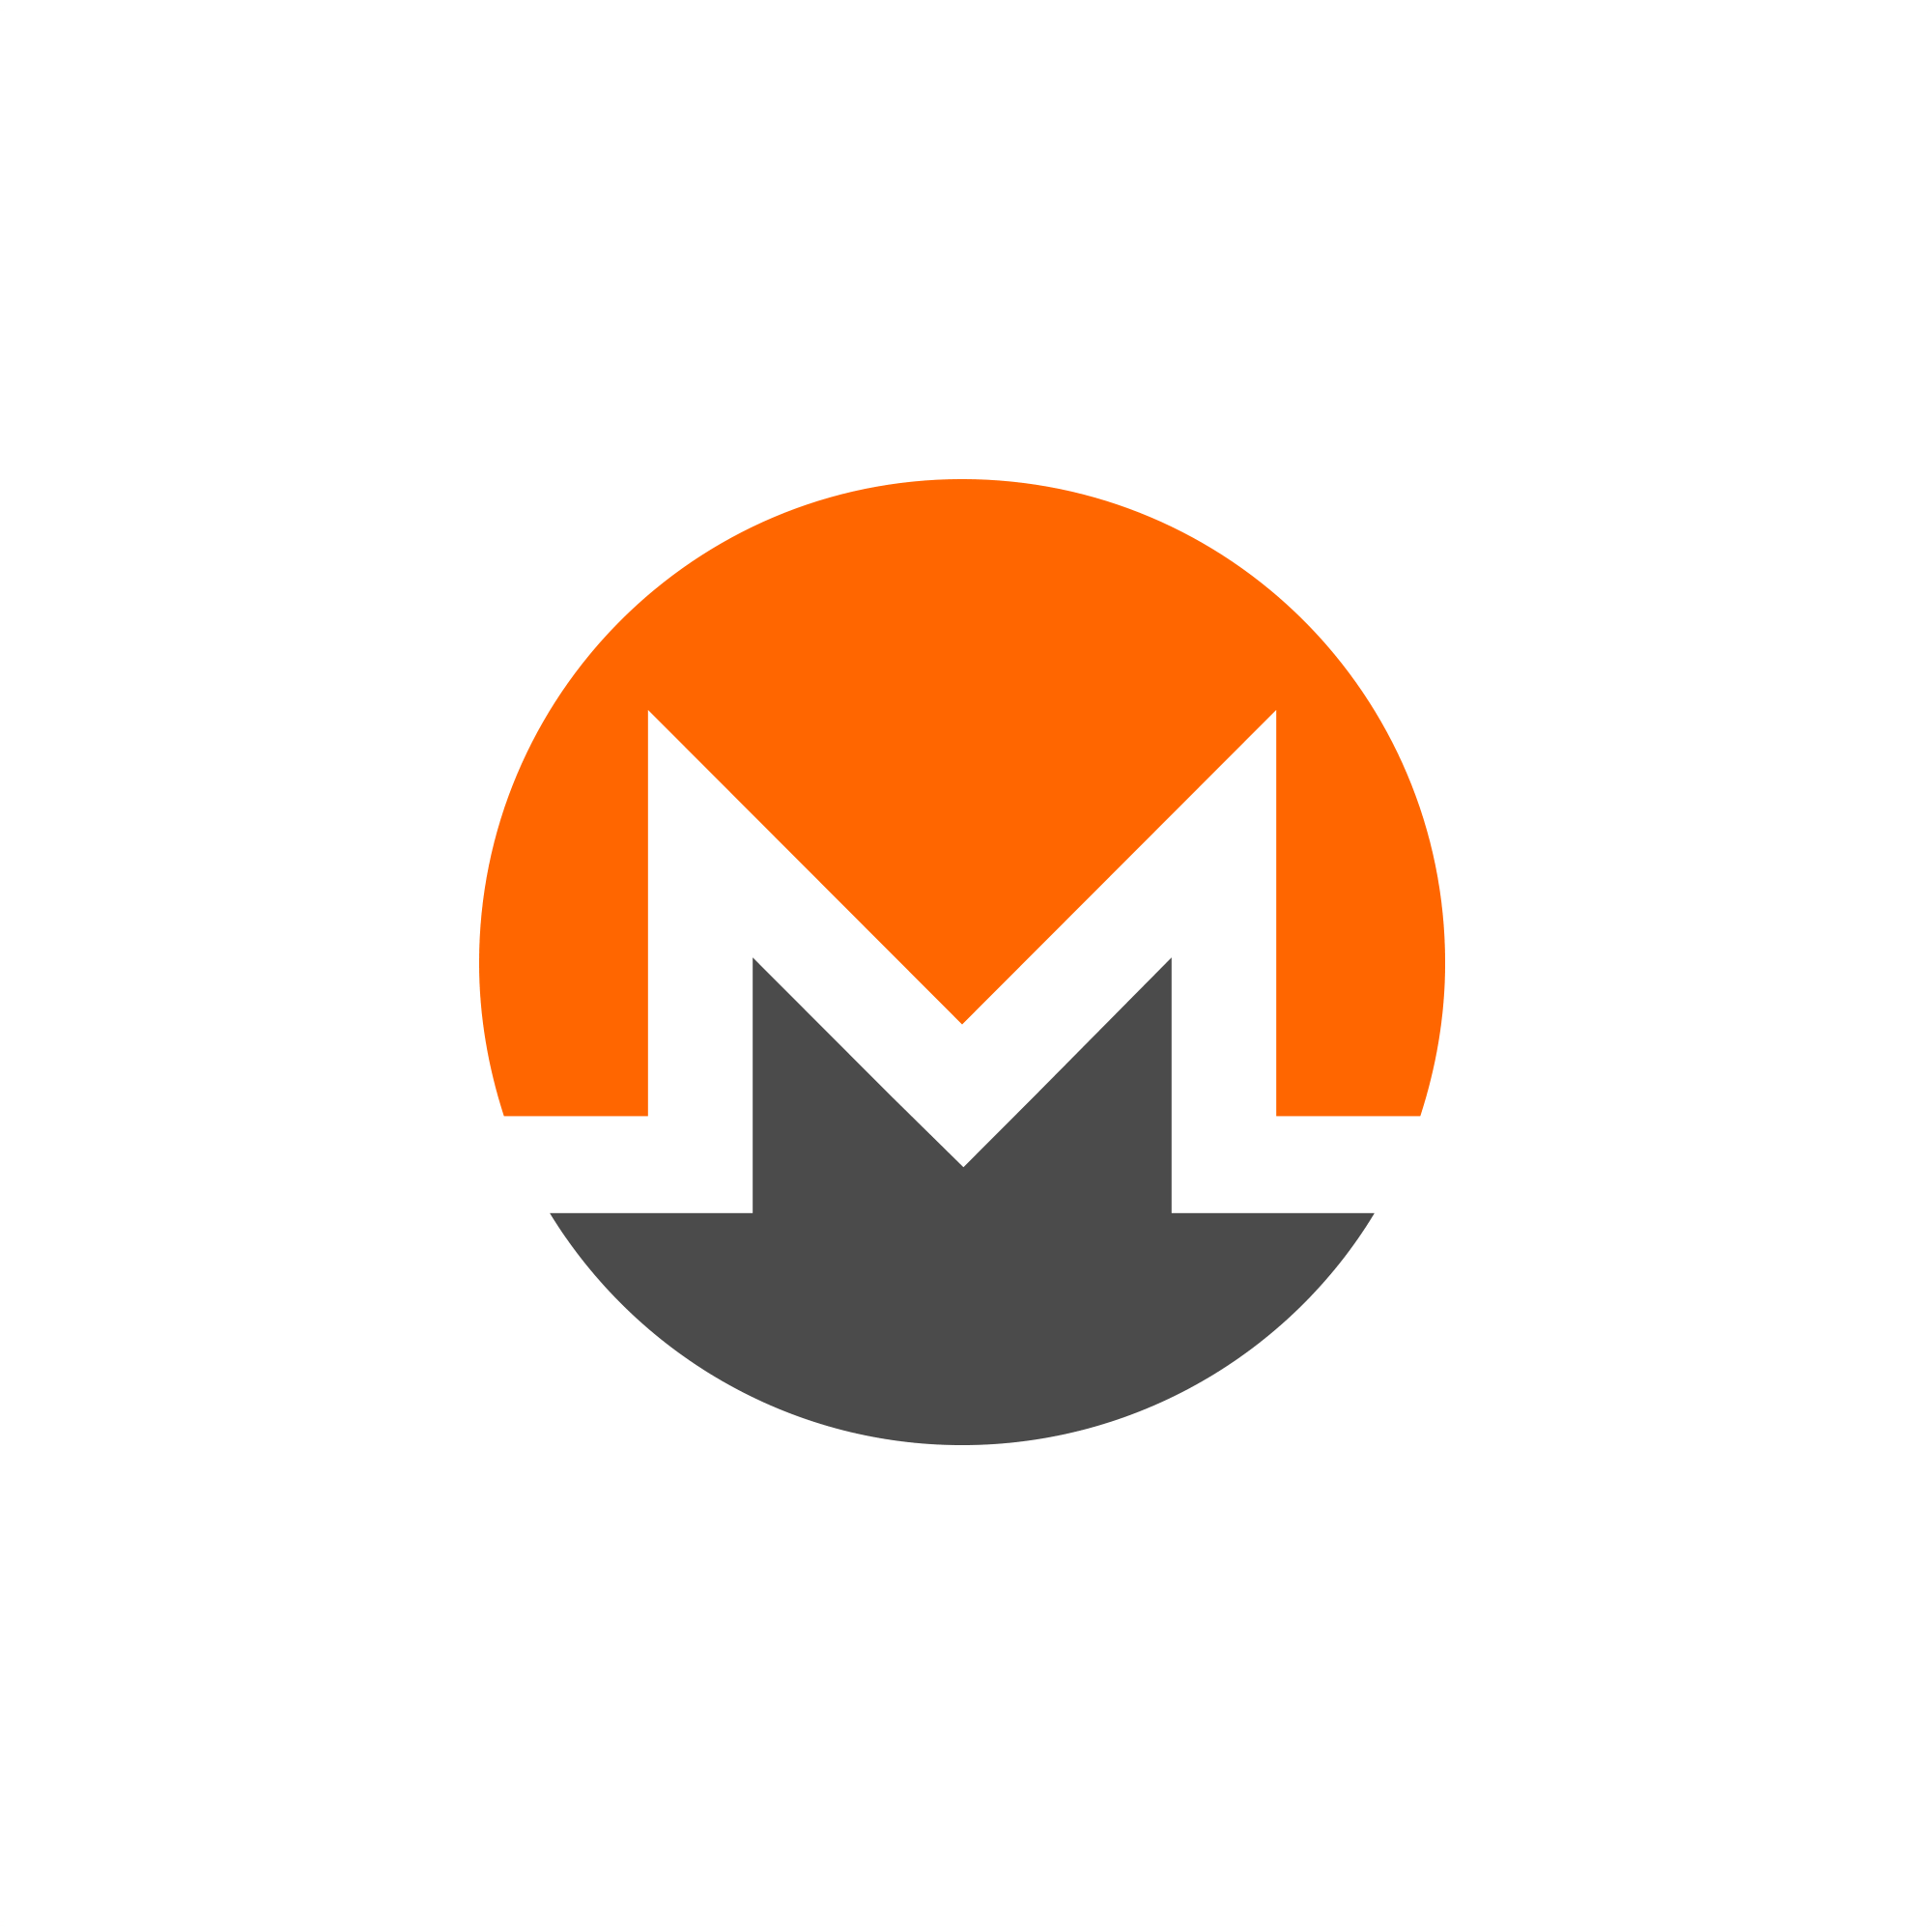 Buy Monero (XMR) - Step by step guide for buying XMR | Ledger